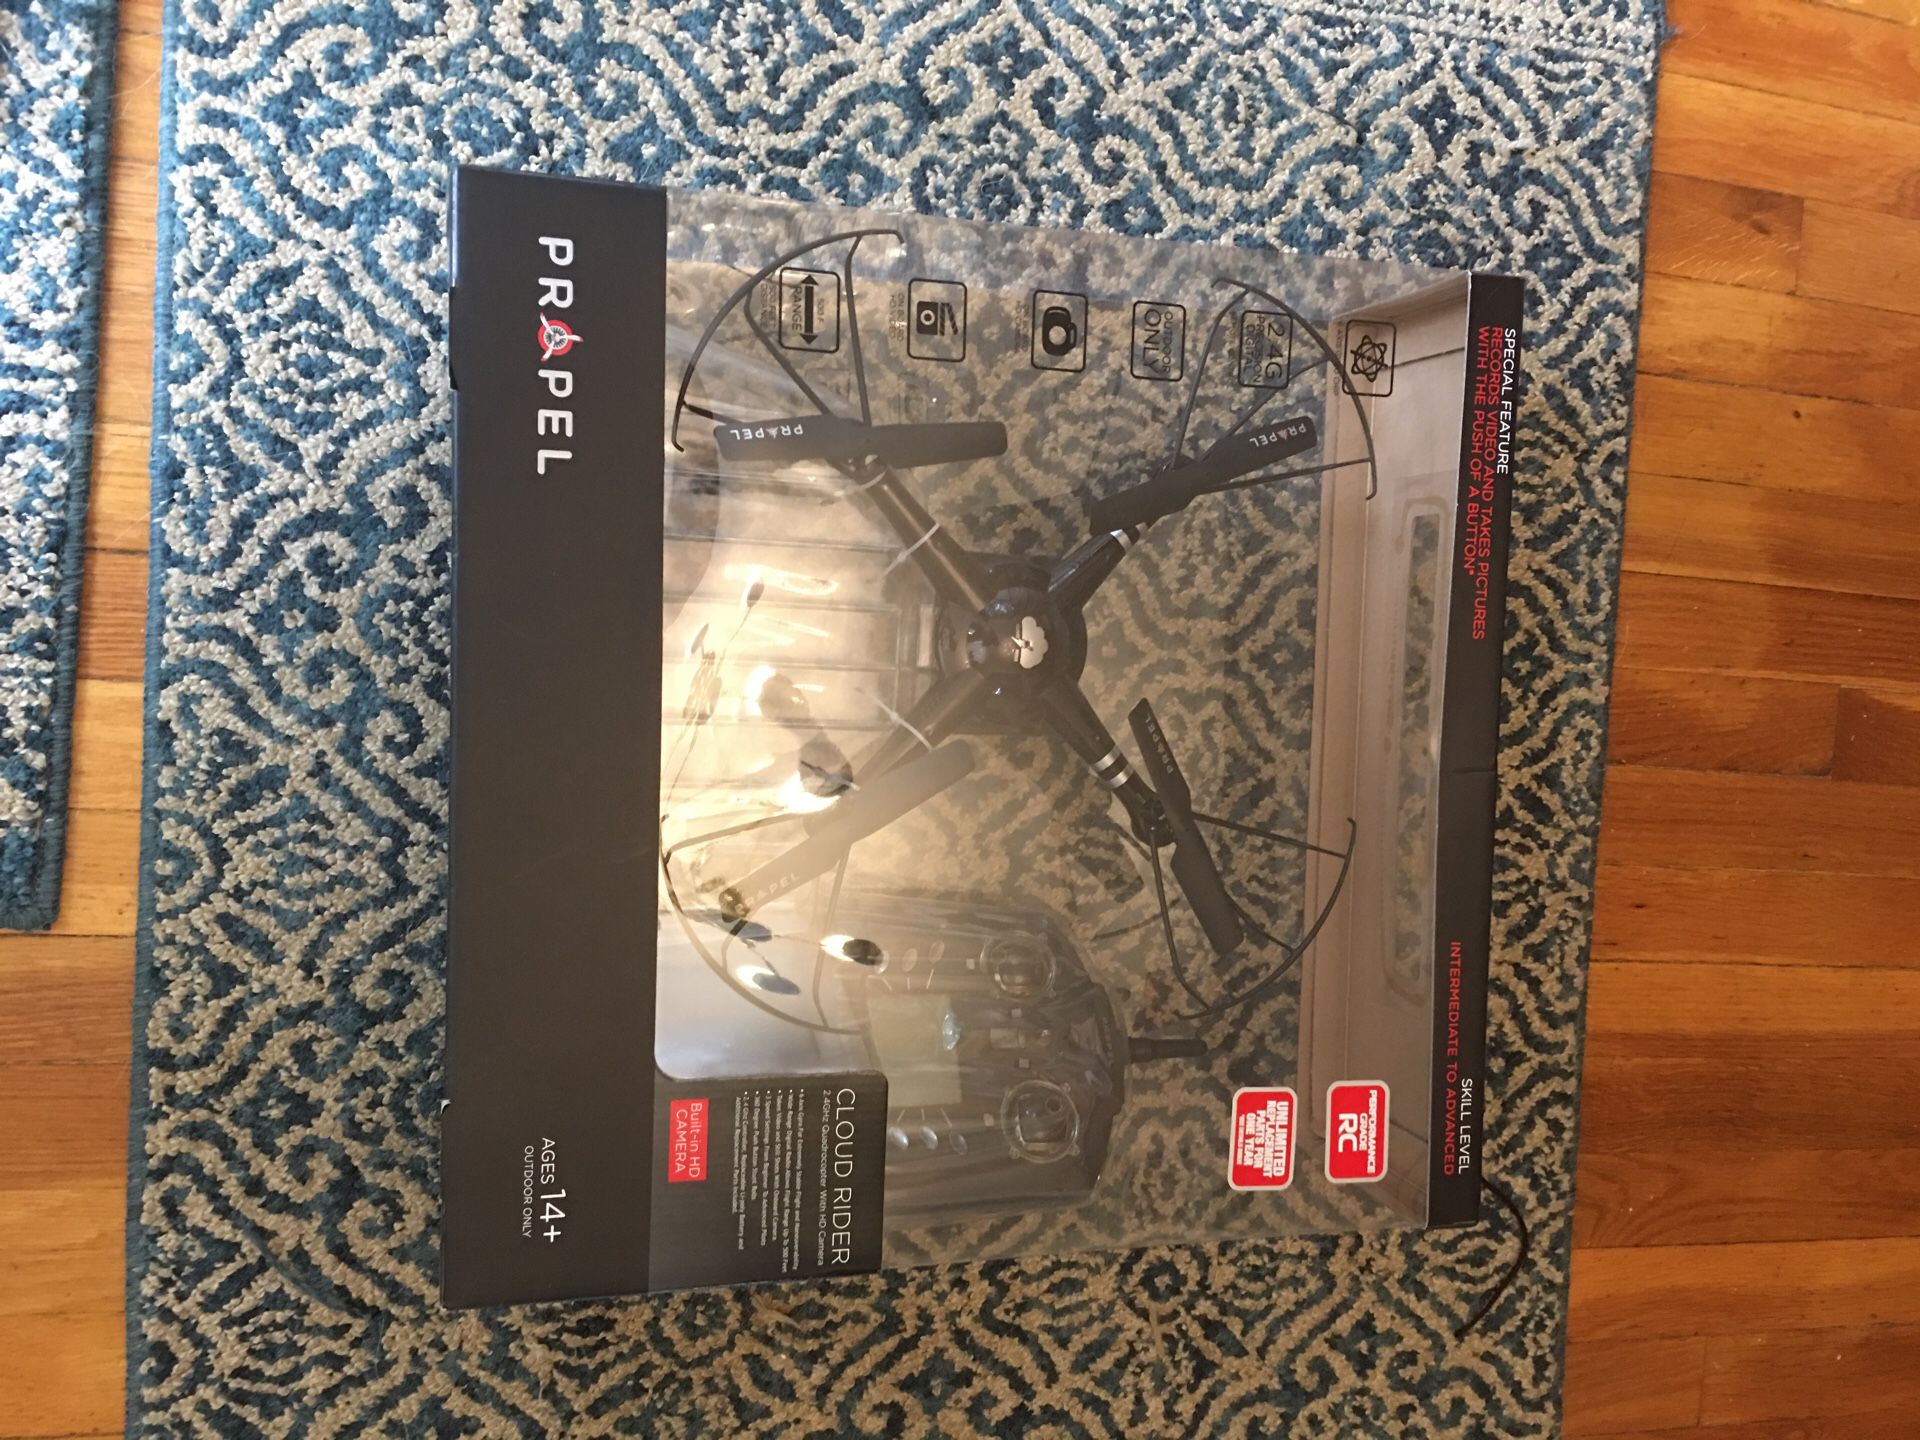 Drone, never opened, original price $150, sell for 80 OBO. HD camera, cloud rider by Propel